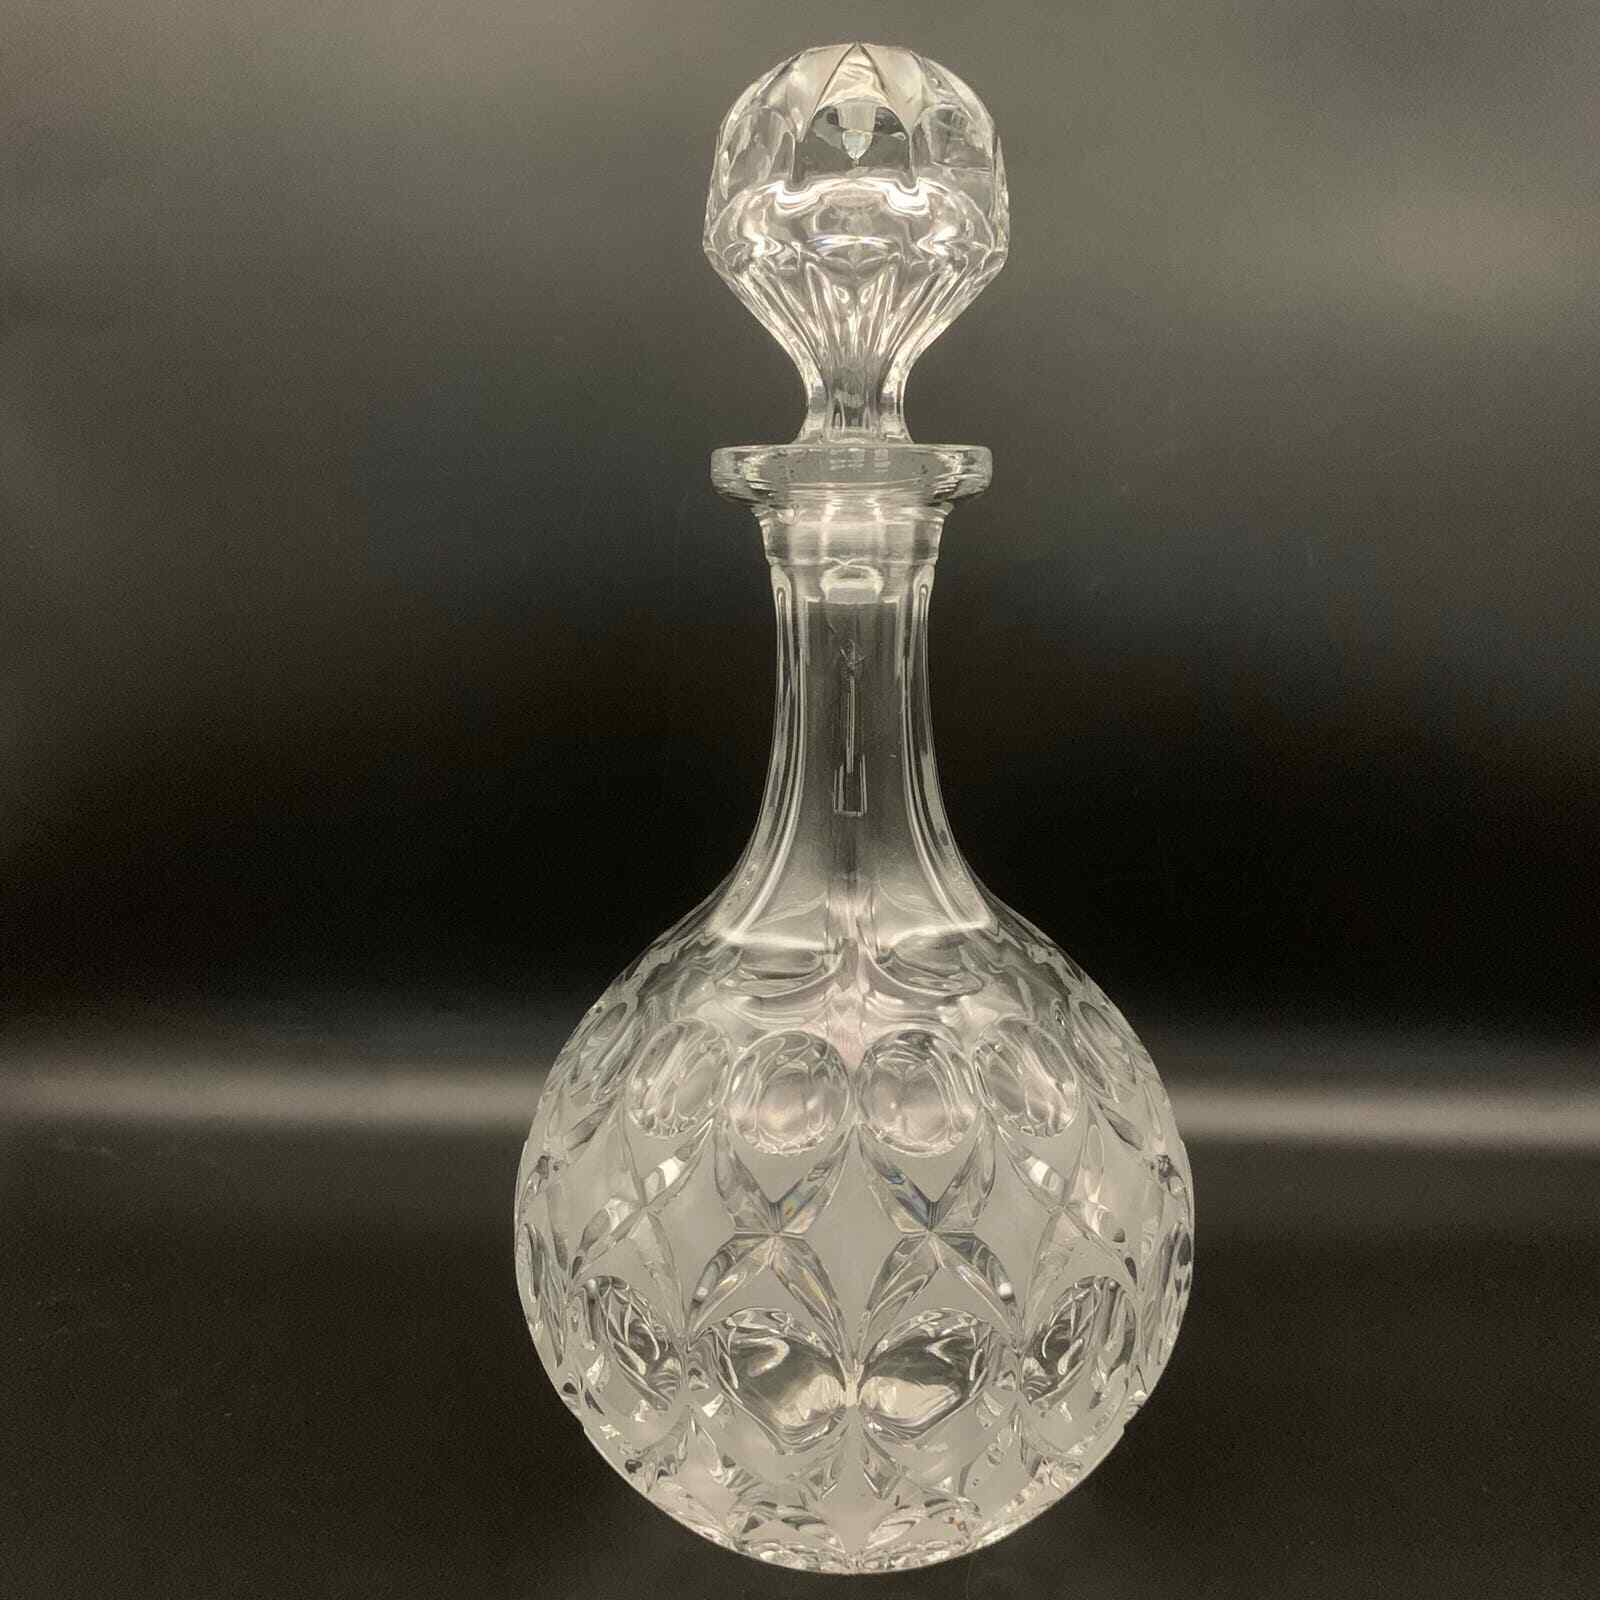 Vintage Nachtmann 11” Round Crystal Glass Decanter Anglia Frosted Etch Pattern 